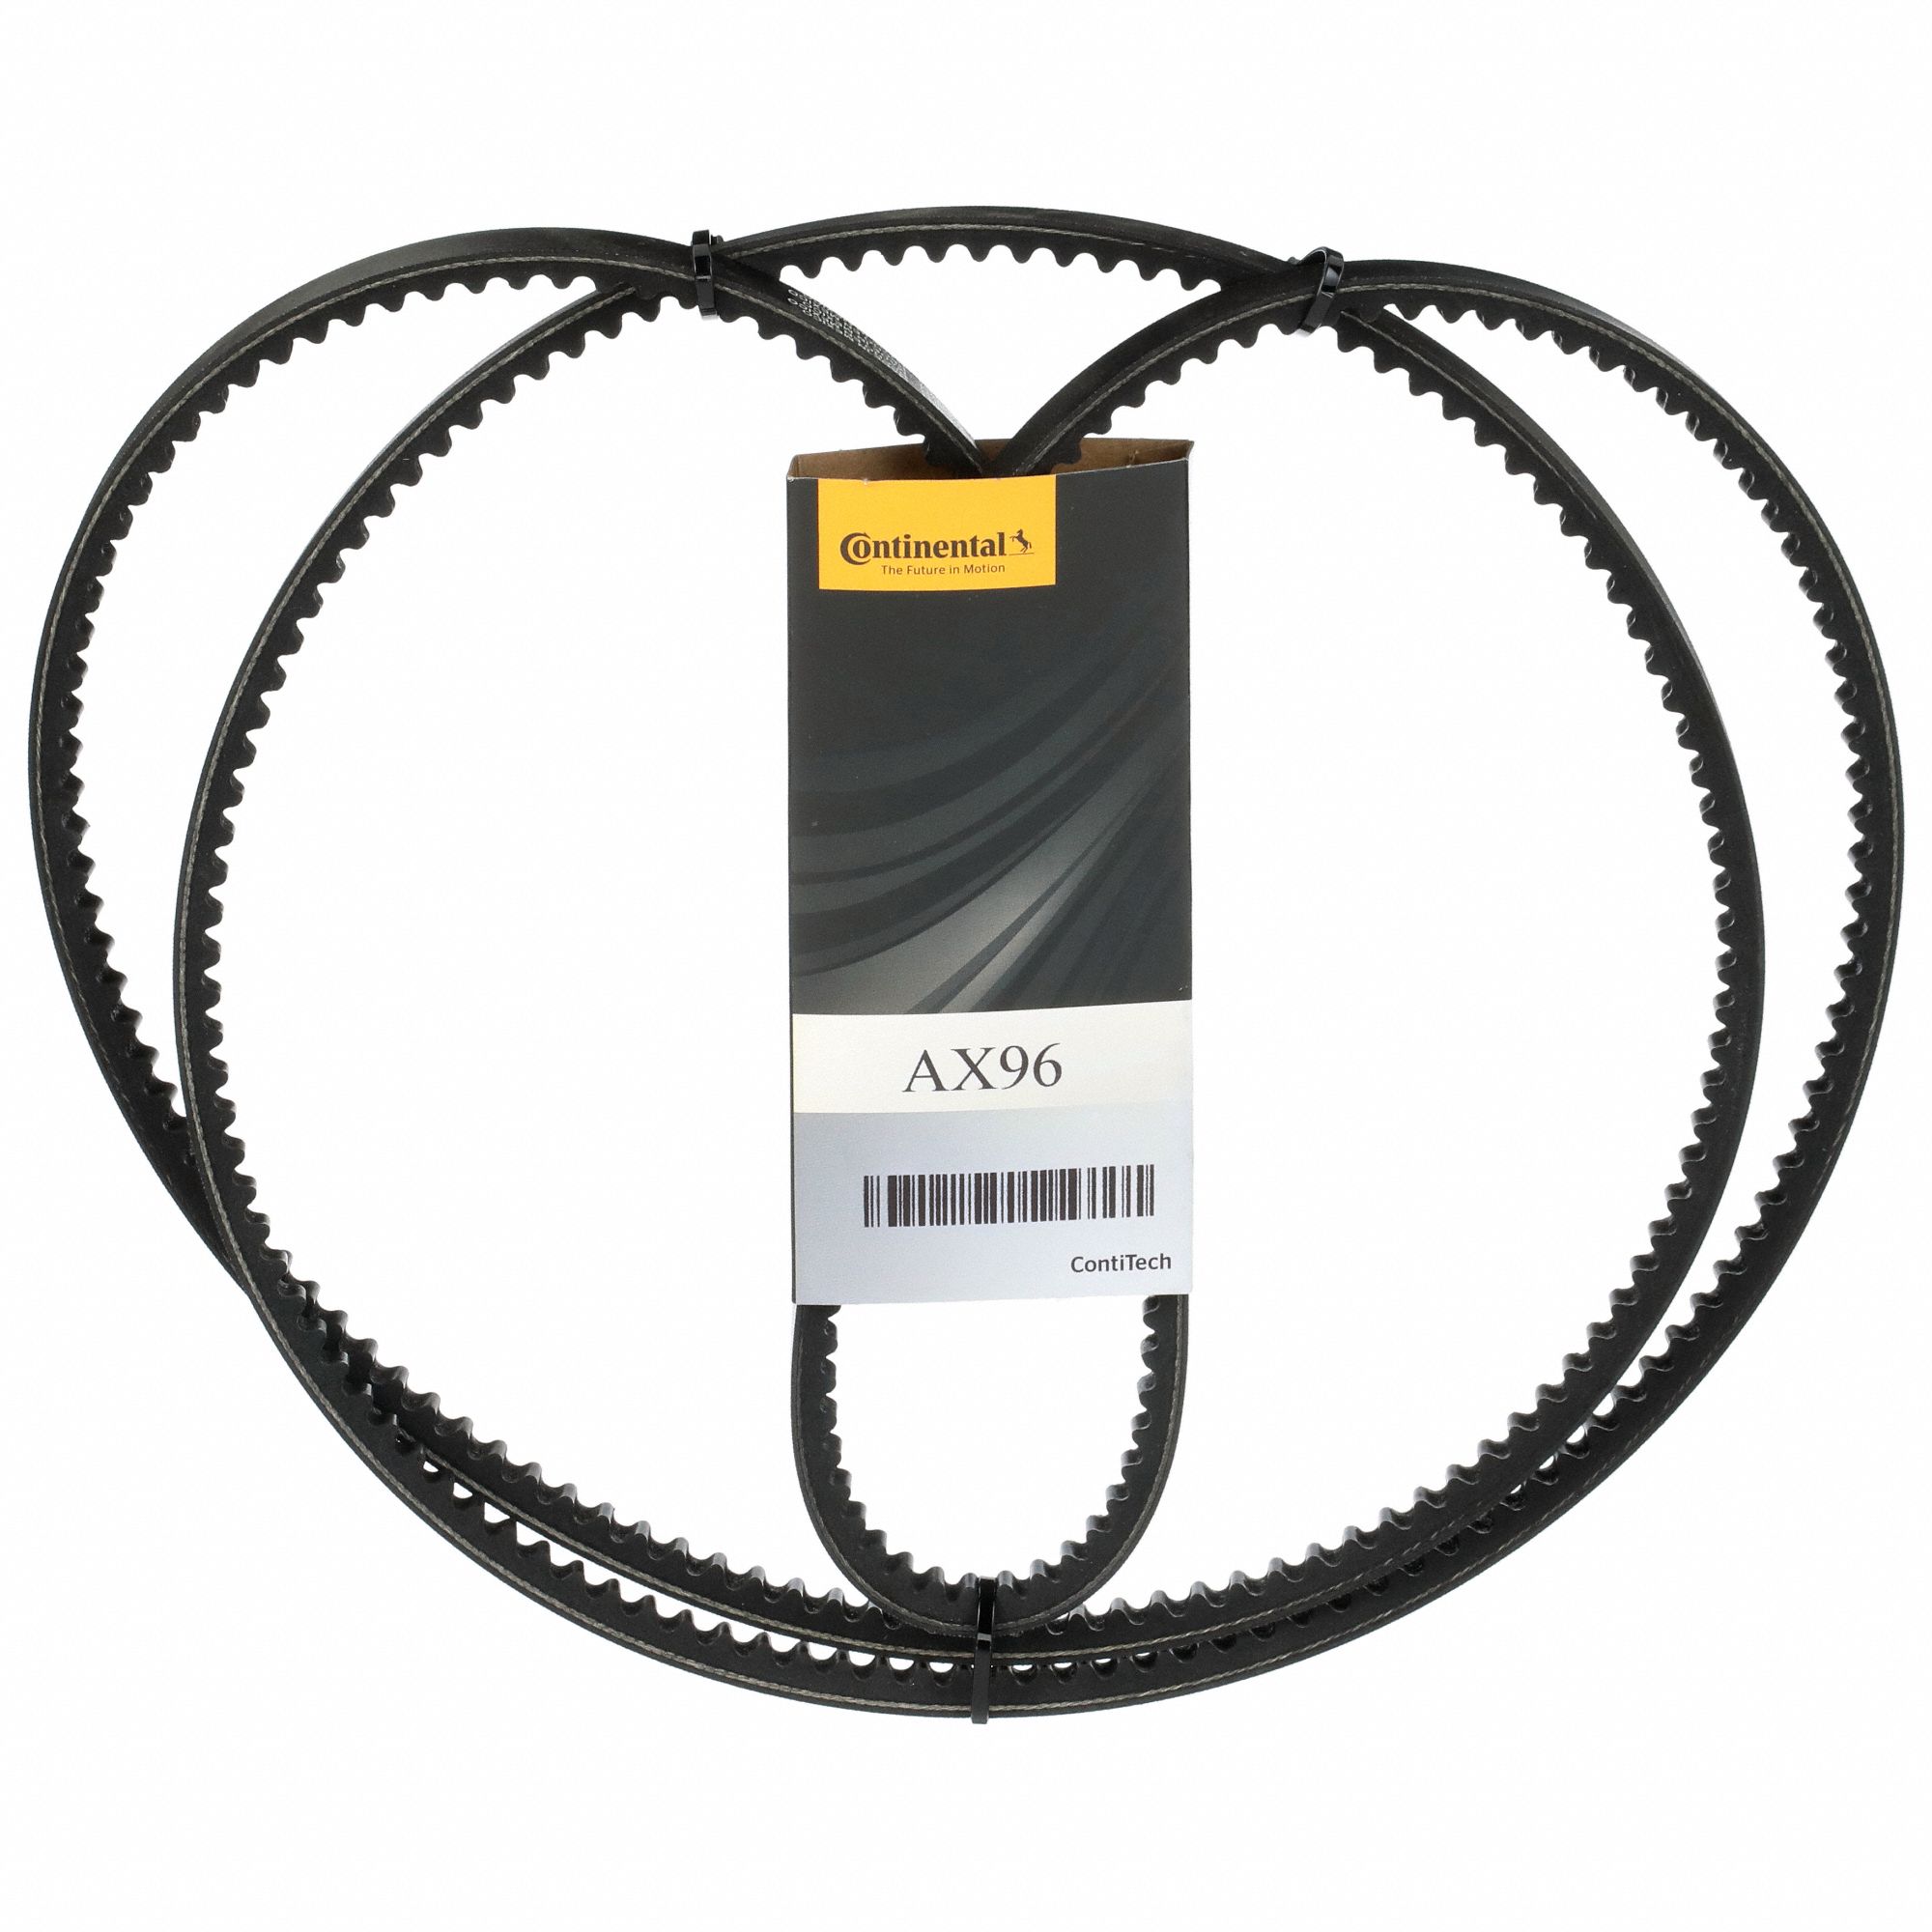 CONTINENTAL Cogged V-Belt: AX90, 92 in Outside Lg, 0.5 in Top Wd, 5/16 in  Thick